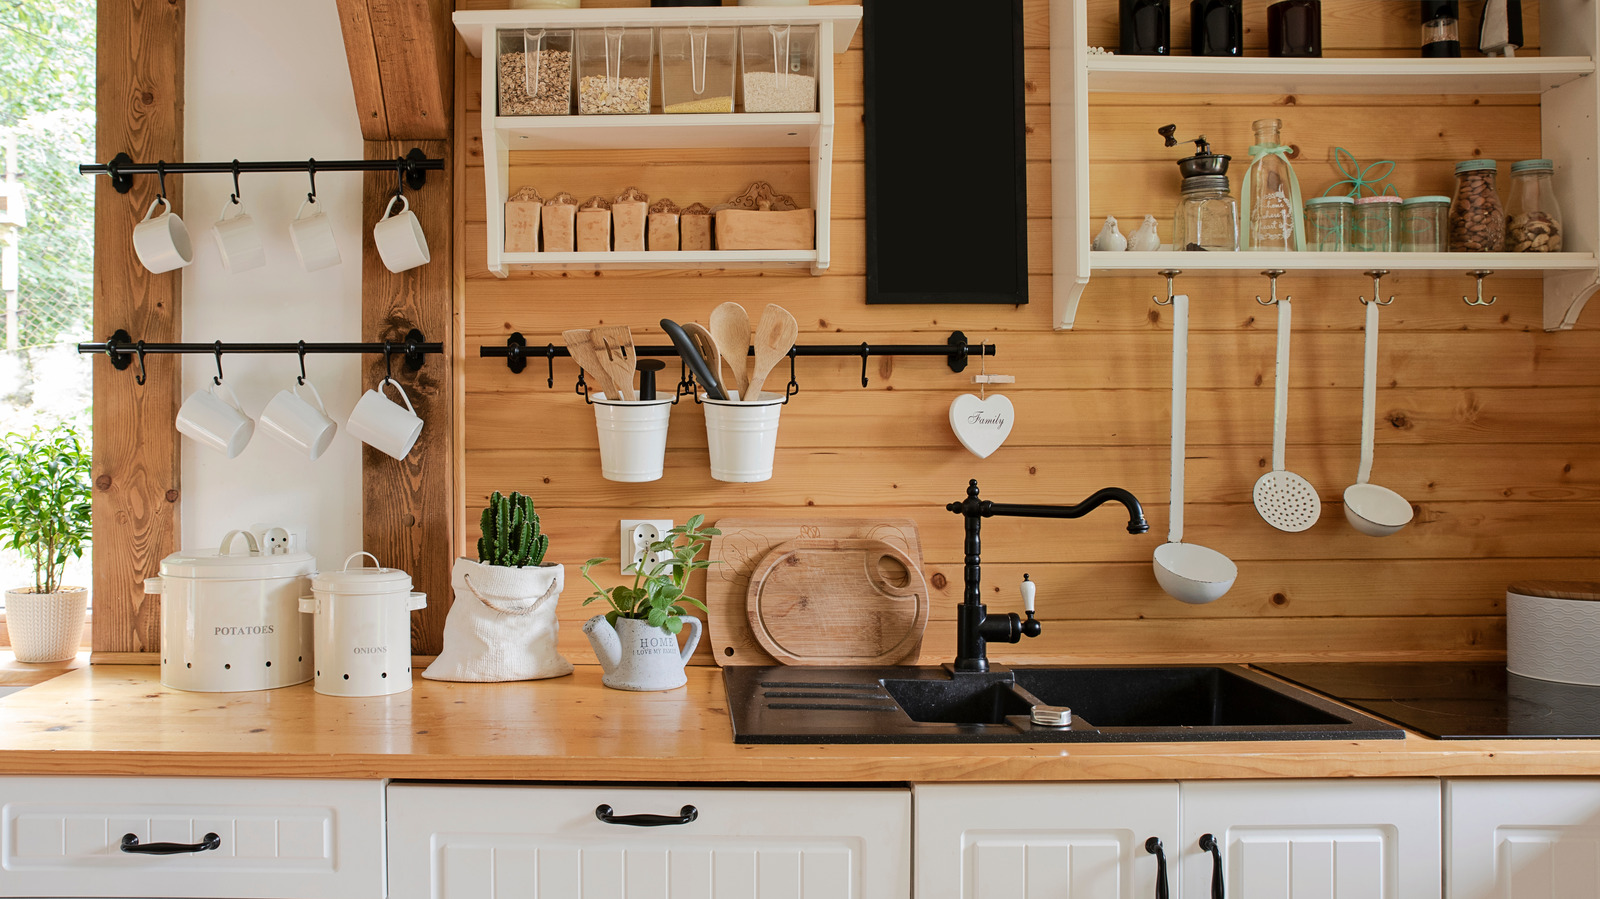 Designing a Rustic Kitchen: Incorporating Cabinets, Furniture, and